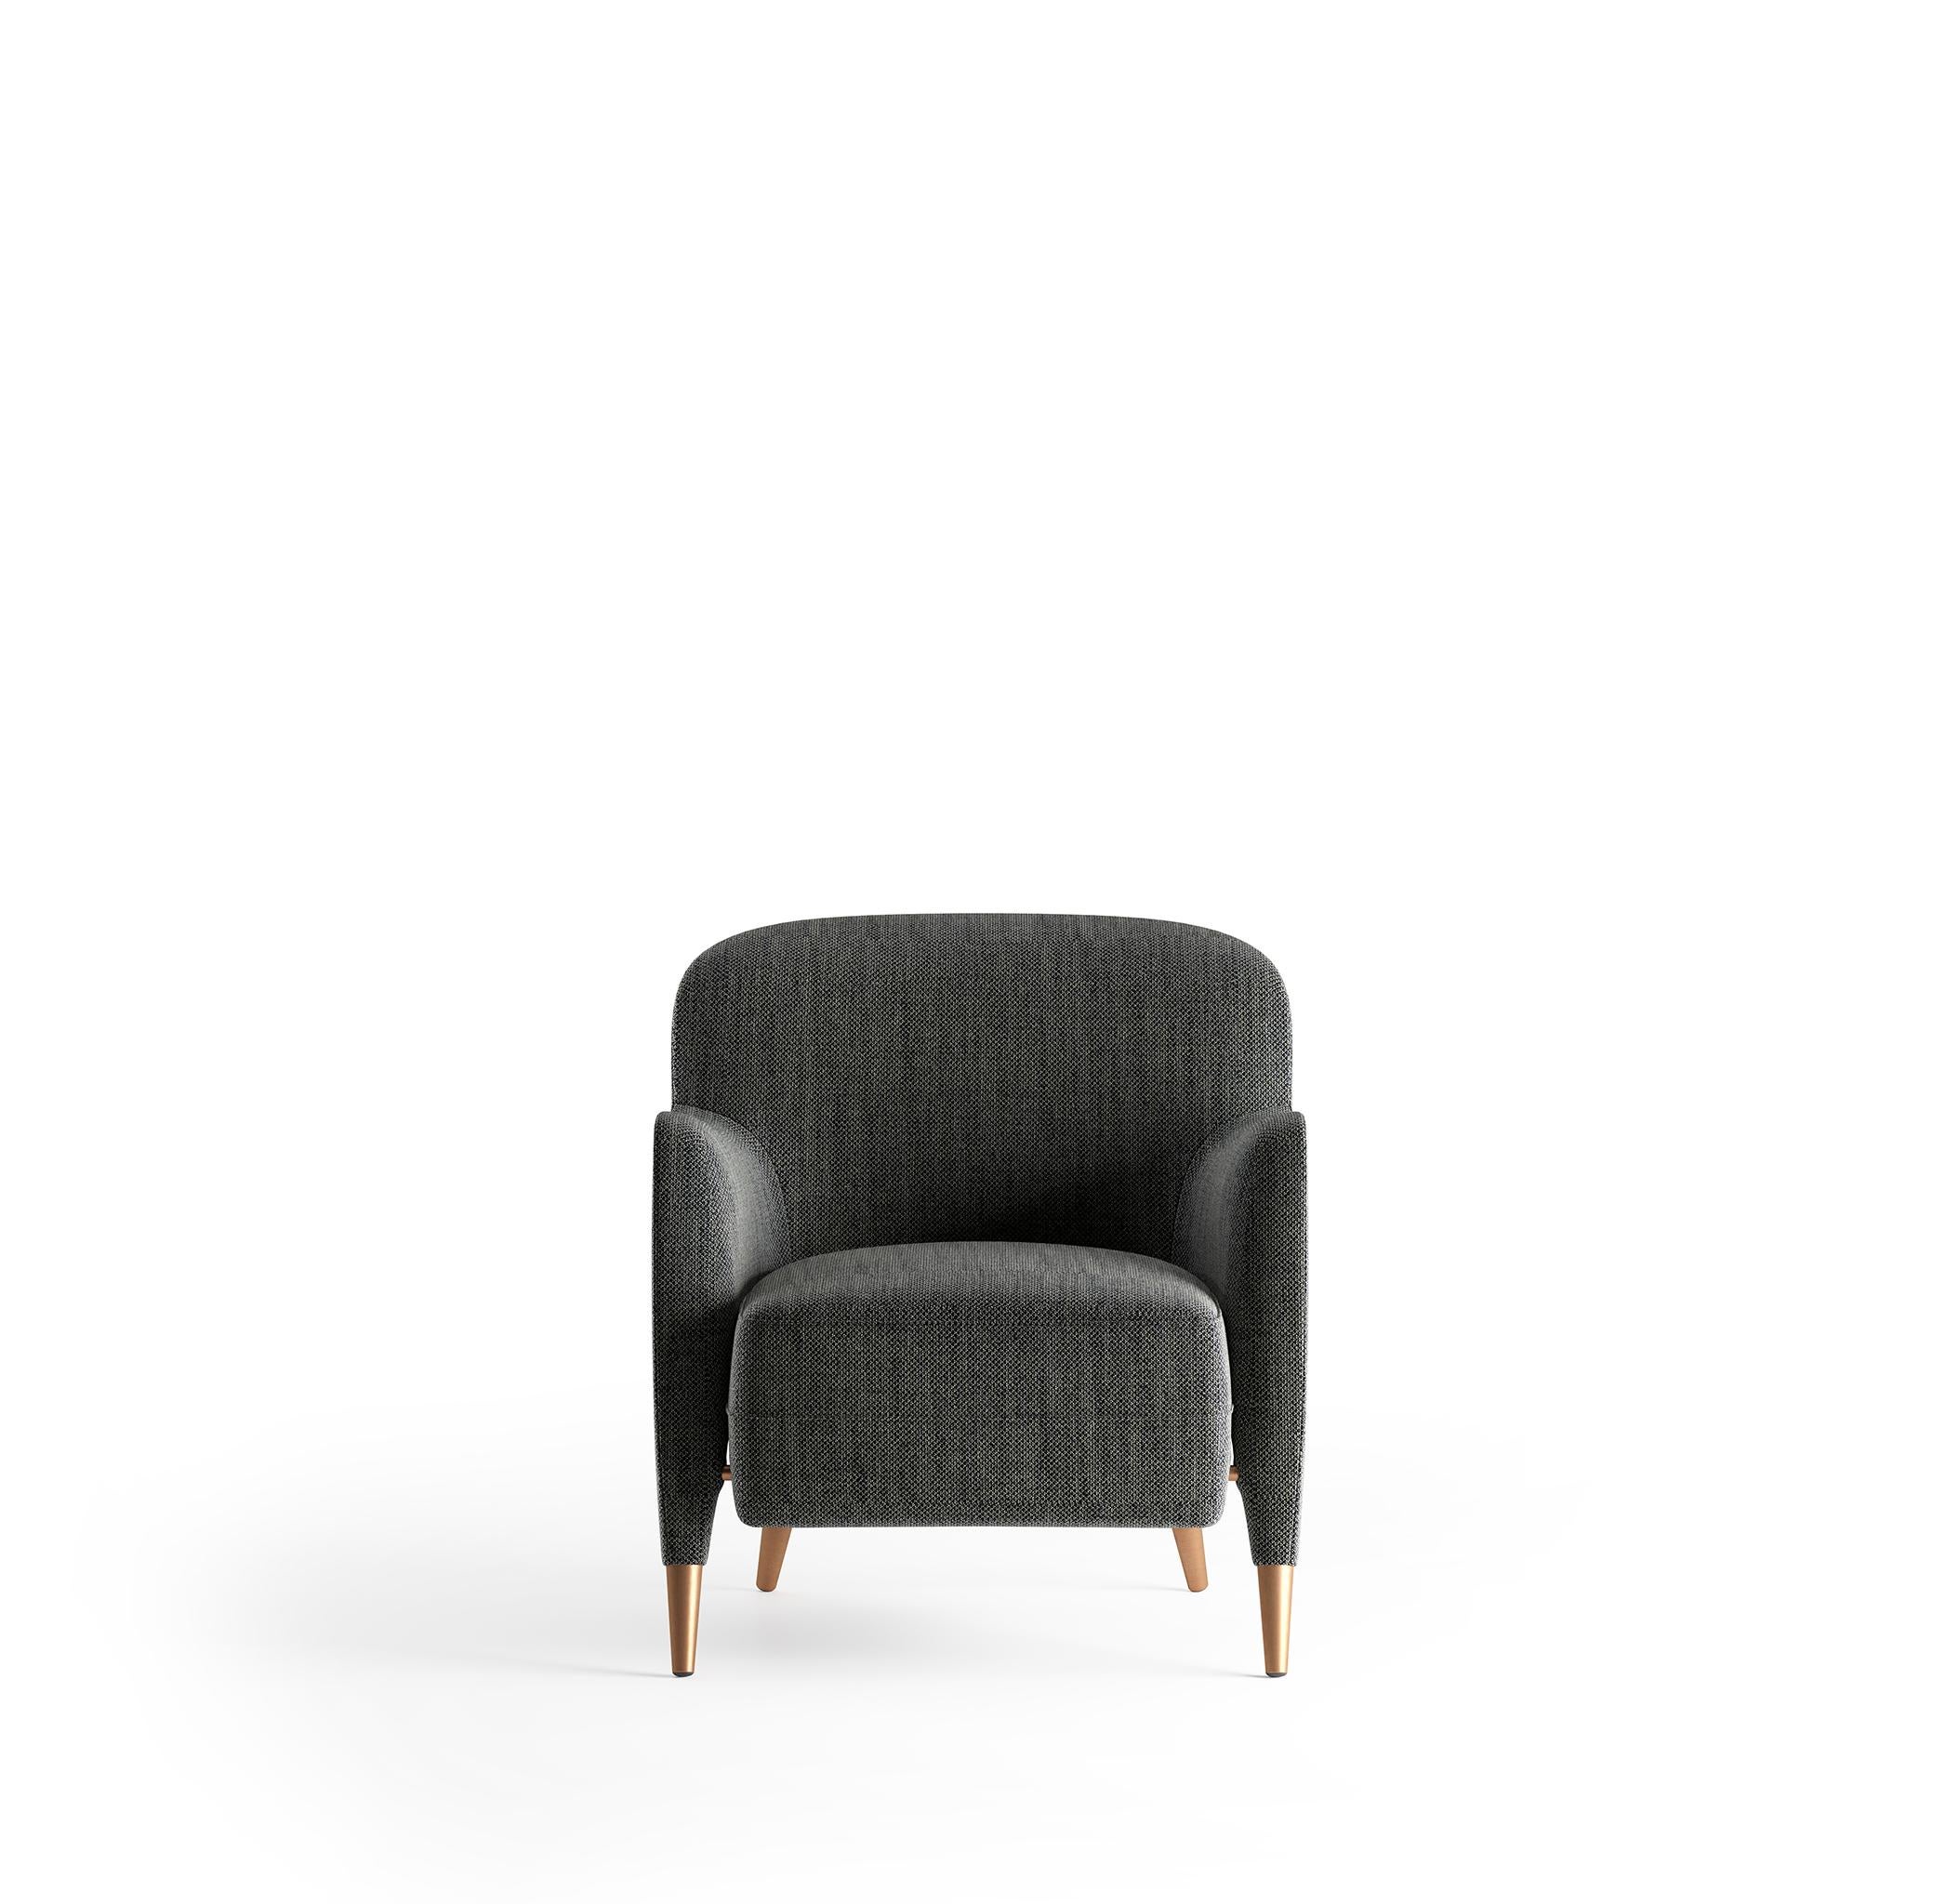 Italian  Greywear Linen Armchair Molteni&C by Gio Ponti Design D.151.4, Made in Italy For Sale